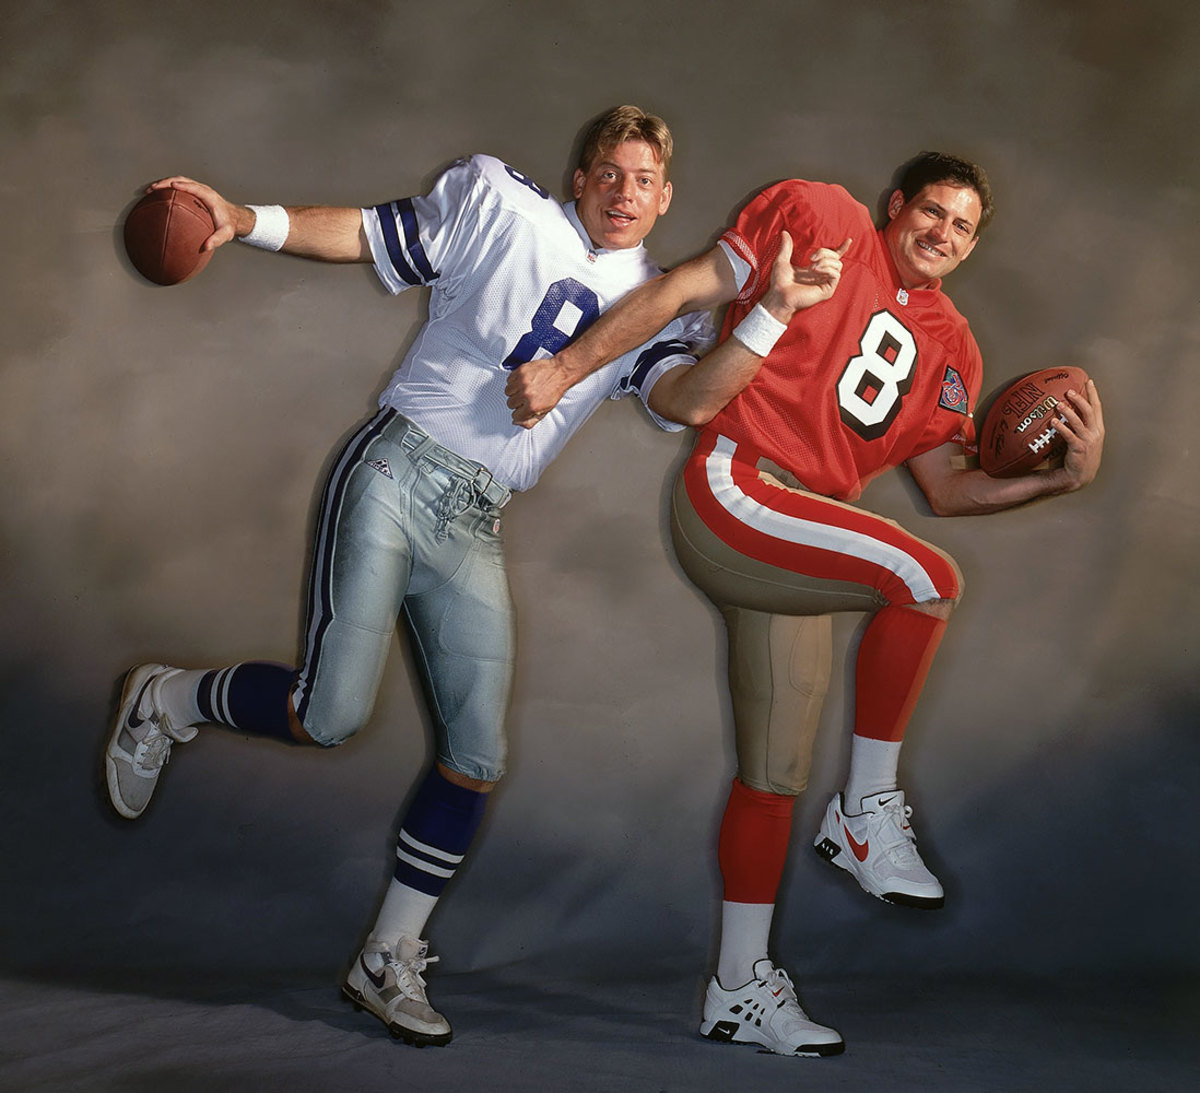 Troy Aikman Classic SI Photos - Sports Illustrated